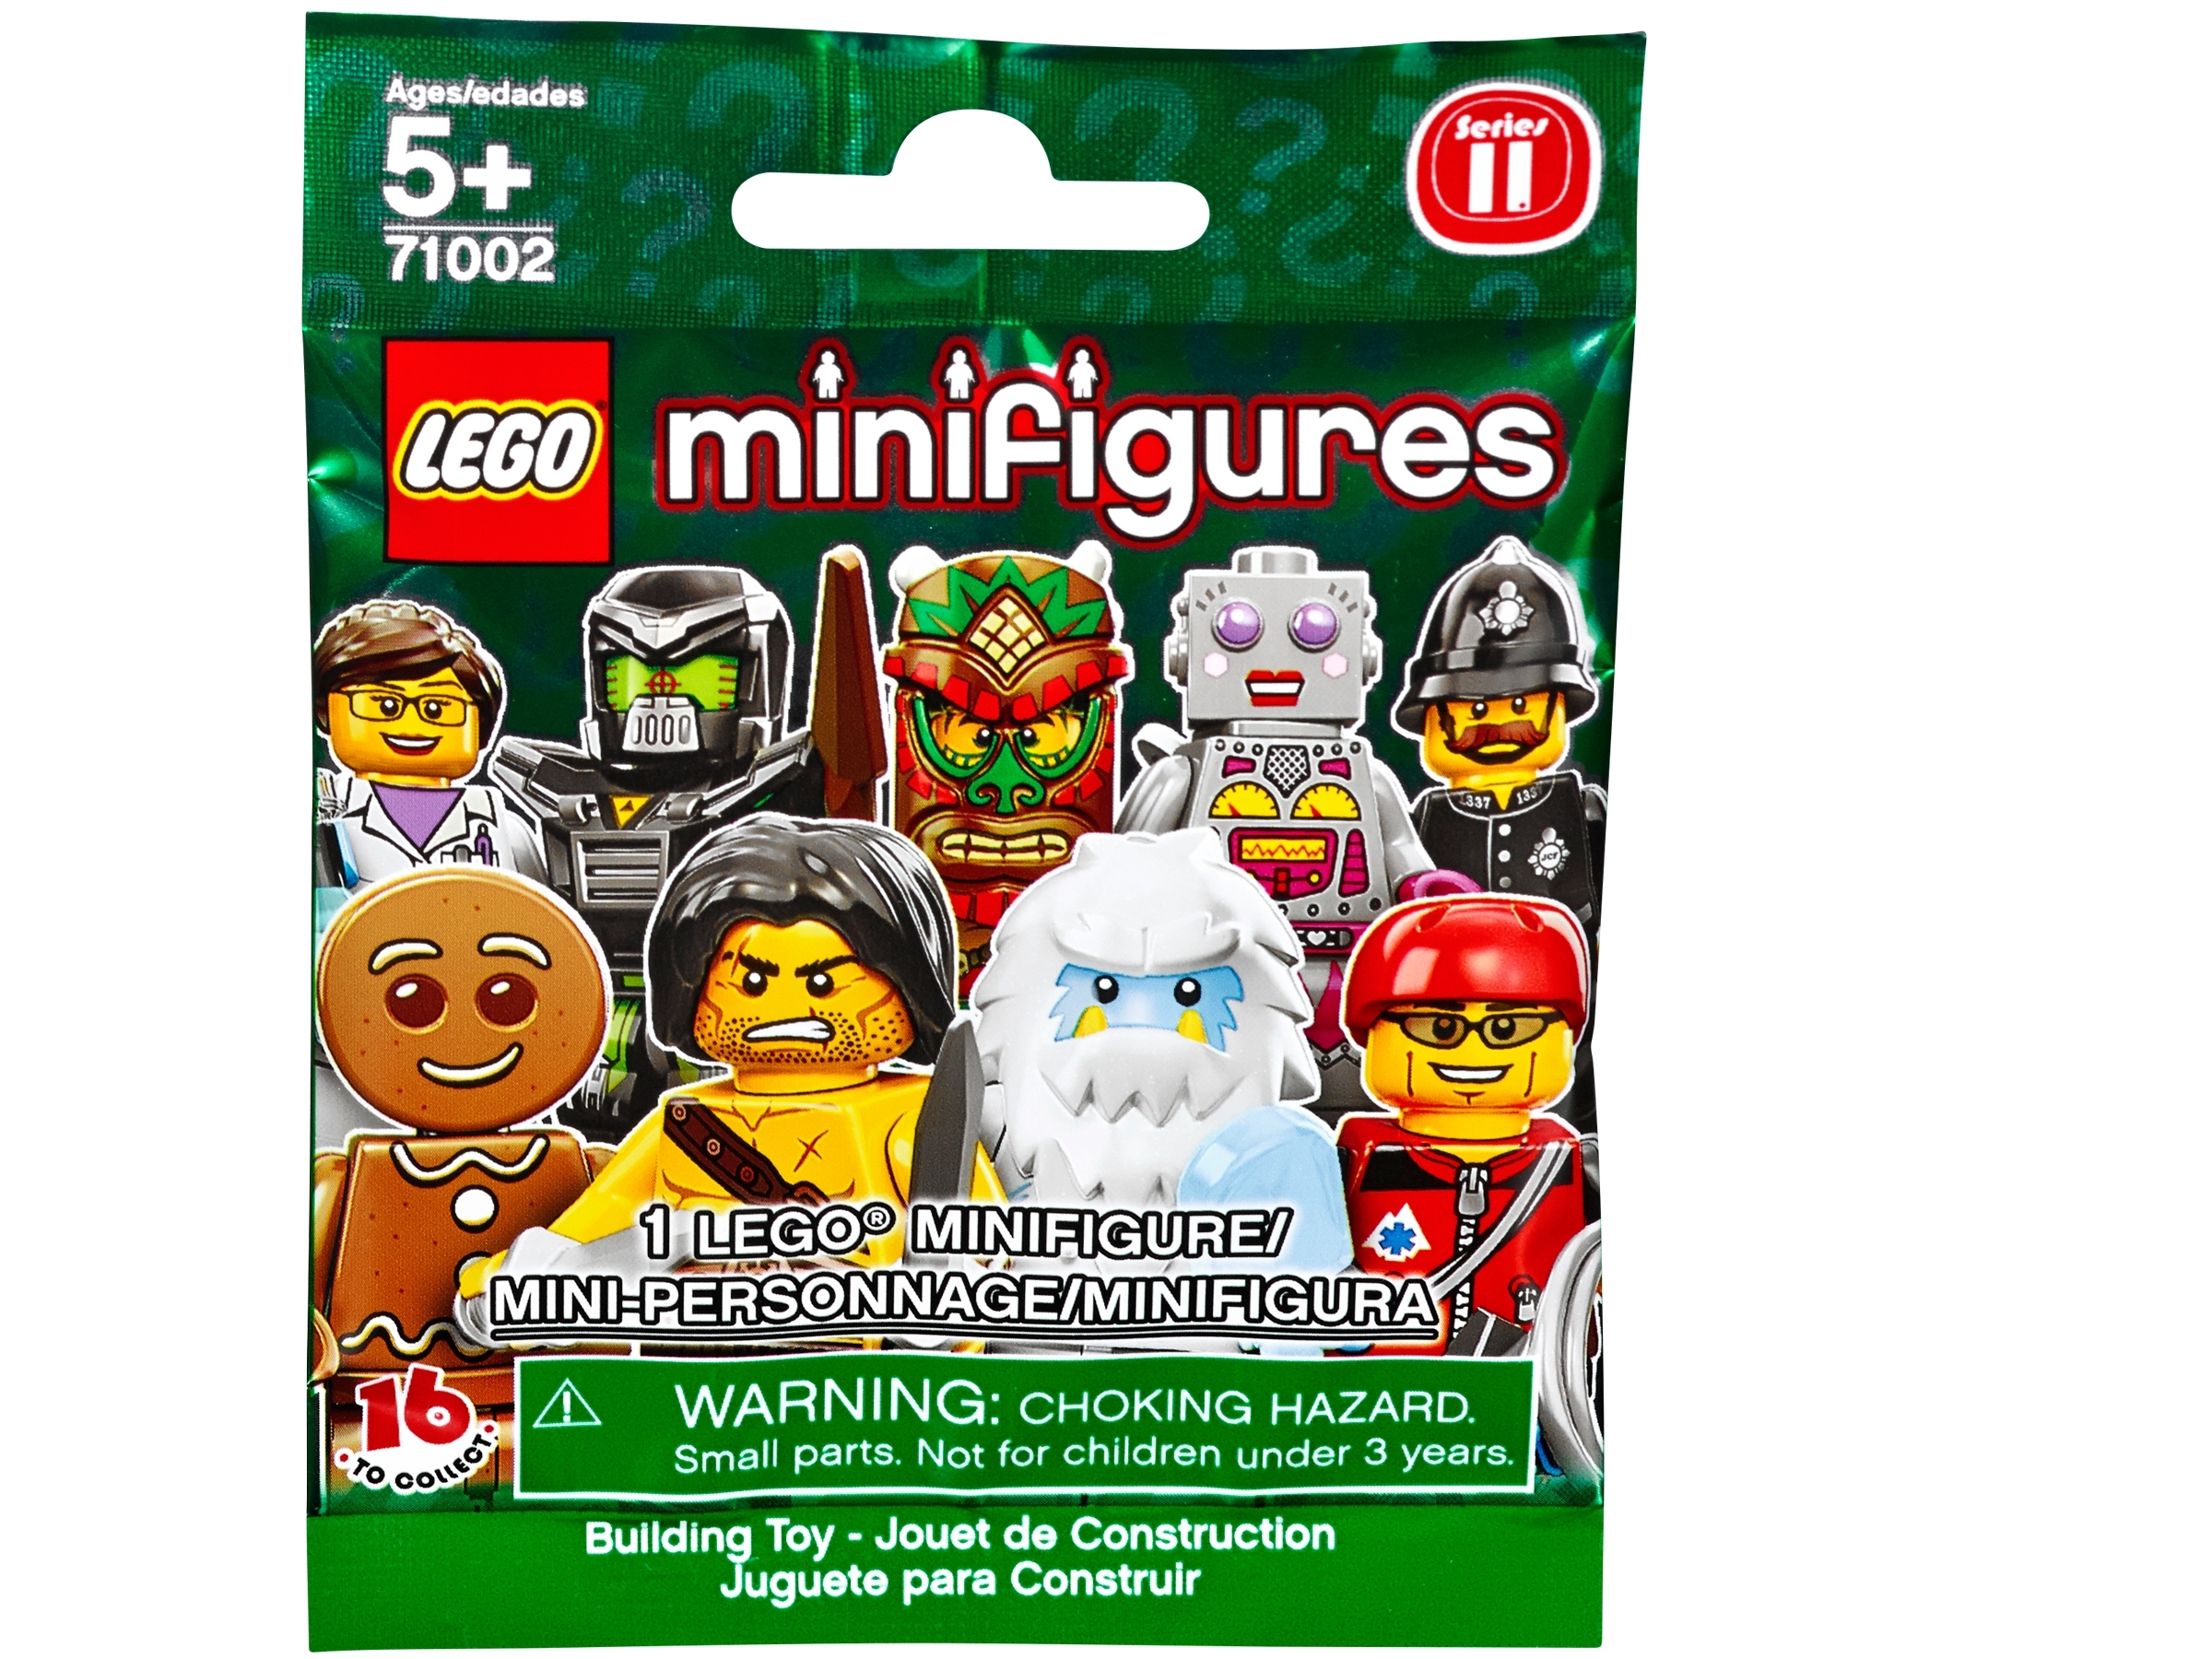 Holiday Elf NEW FACTORY SEALED LEGO 71002 Minifigures Série 11, 